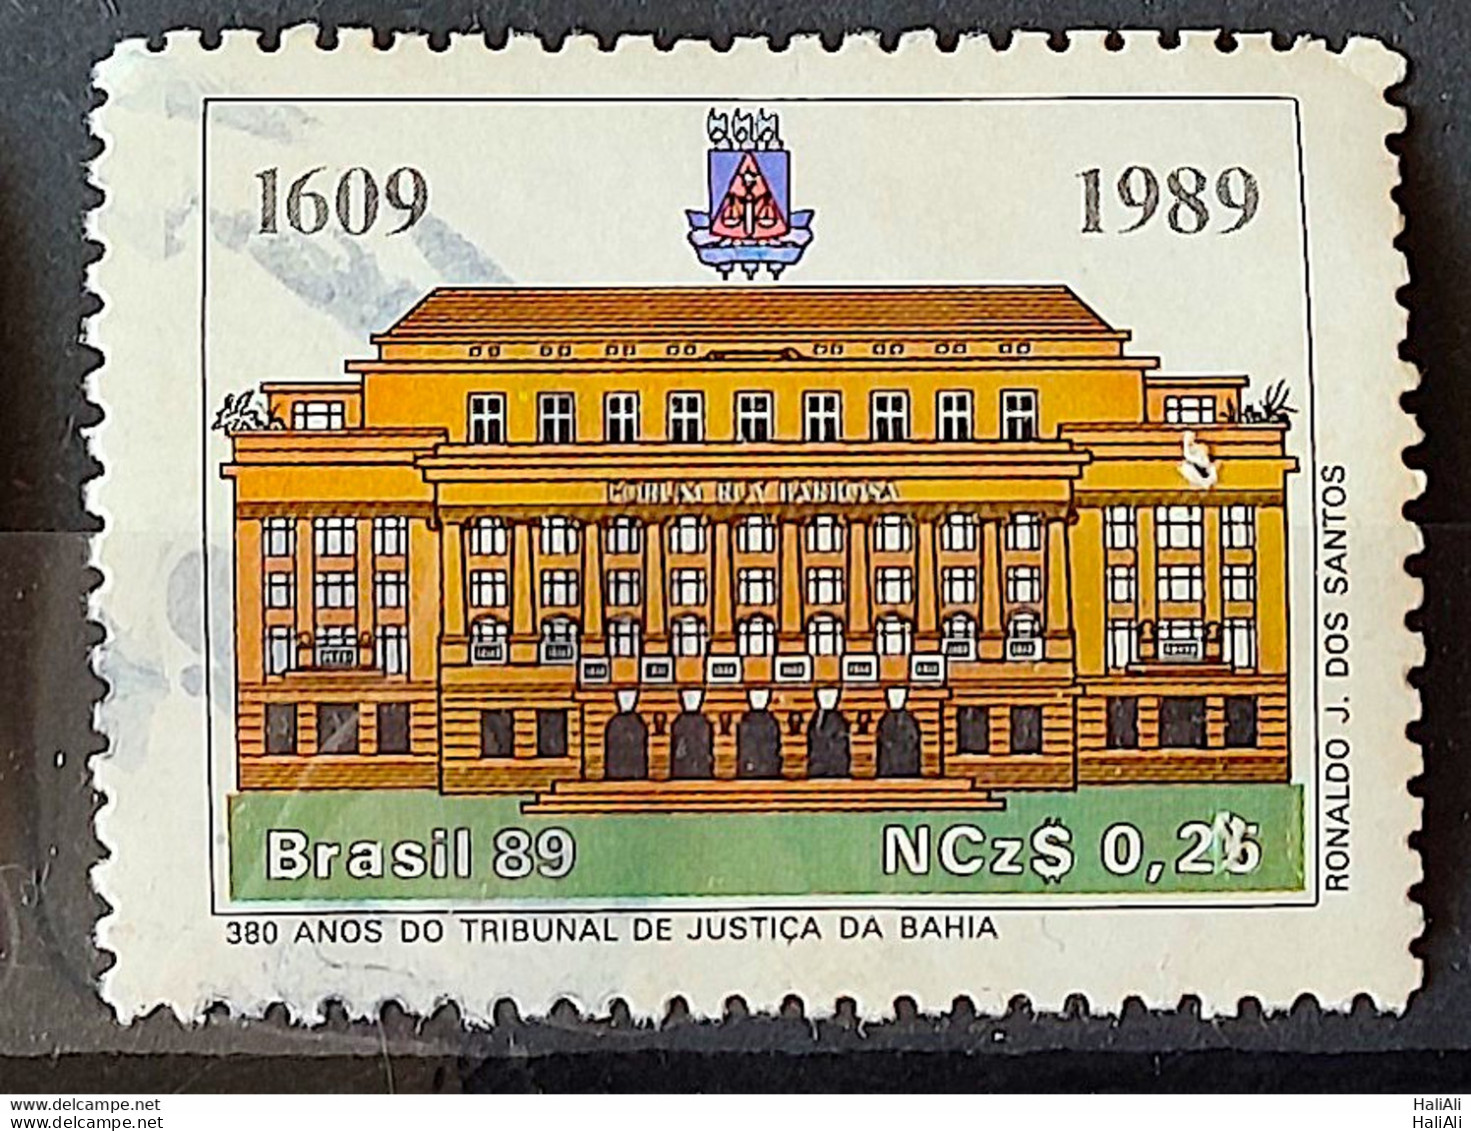 C 1619 Brazil Stamp 380 Years Court Of Justice Of Bahia Law 1989 Circulated 3 - Used Stamps